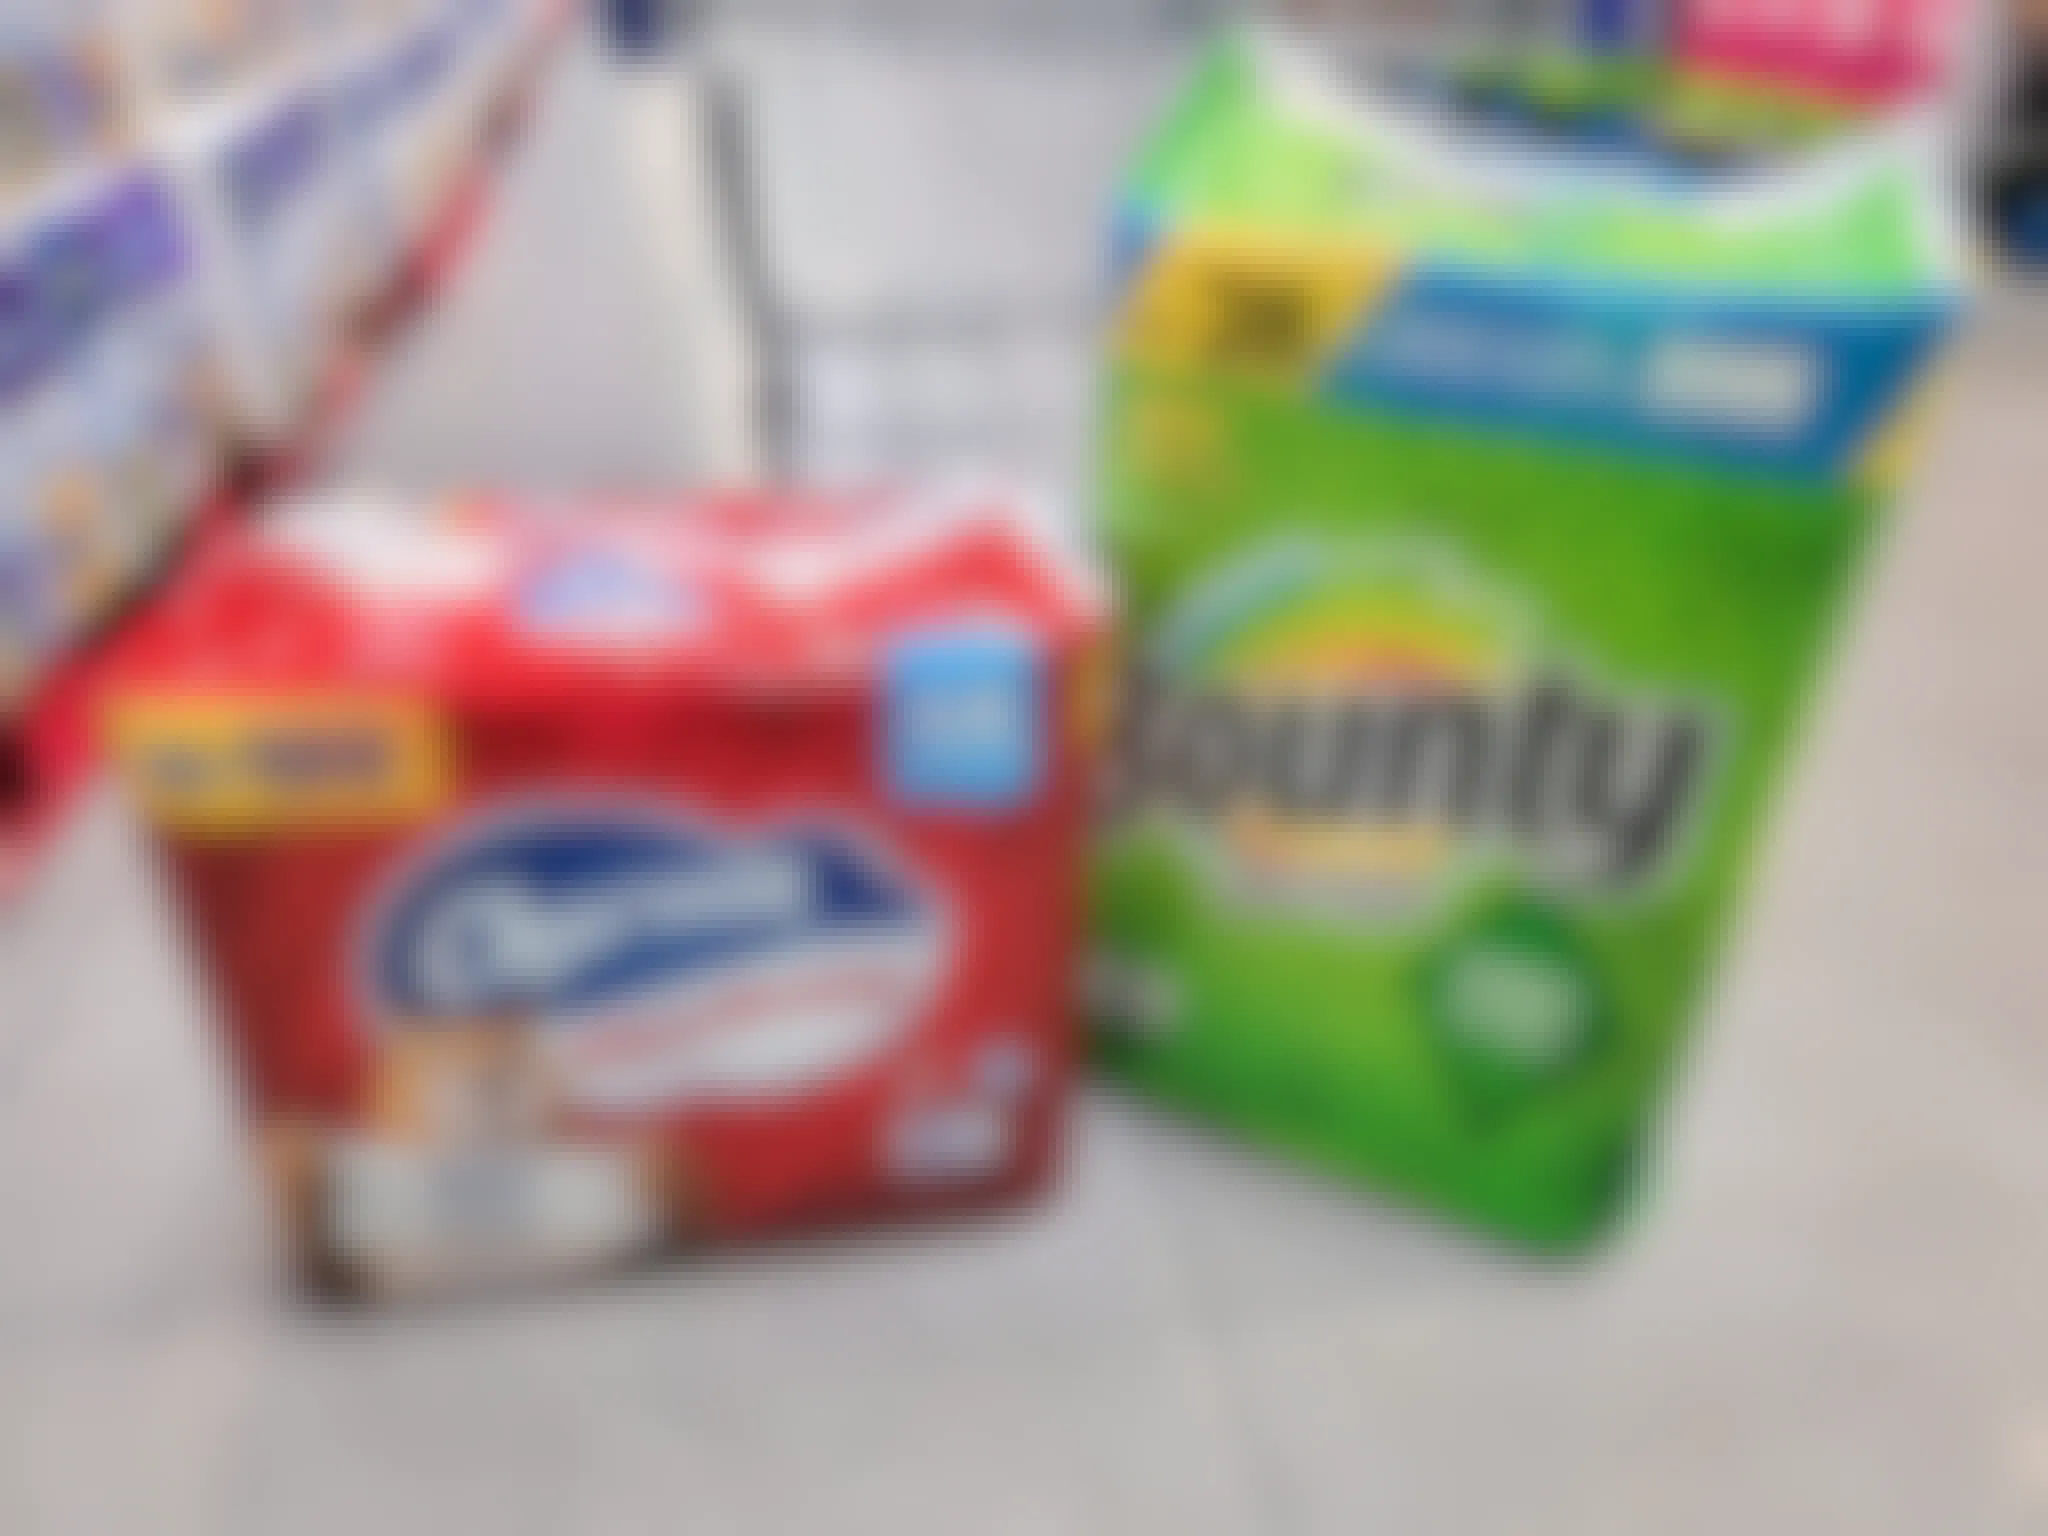 charmin bath tissue & bounty paper towels in front of a cart